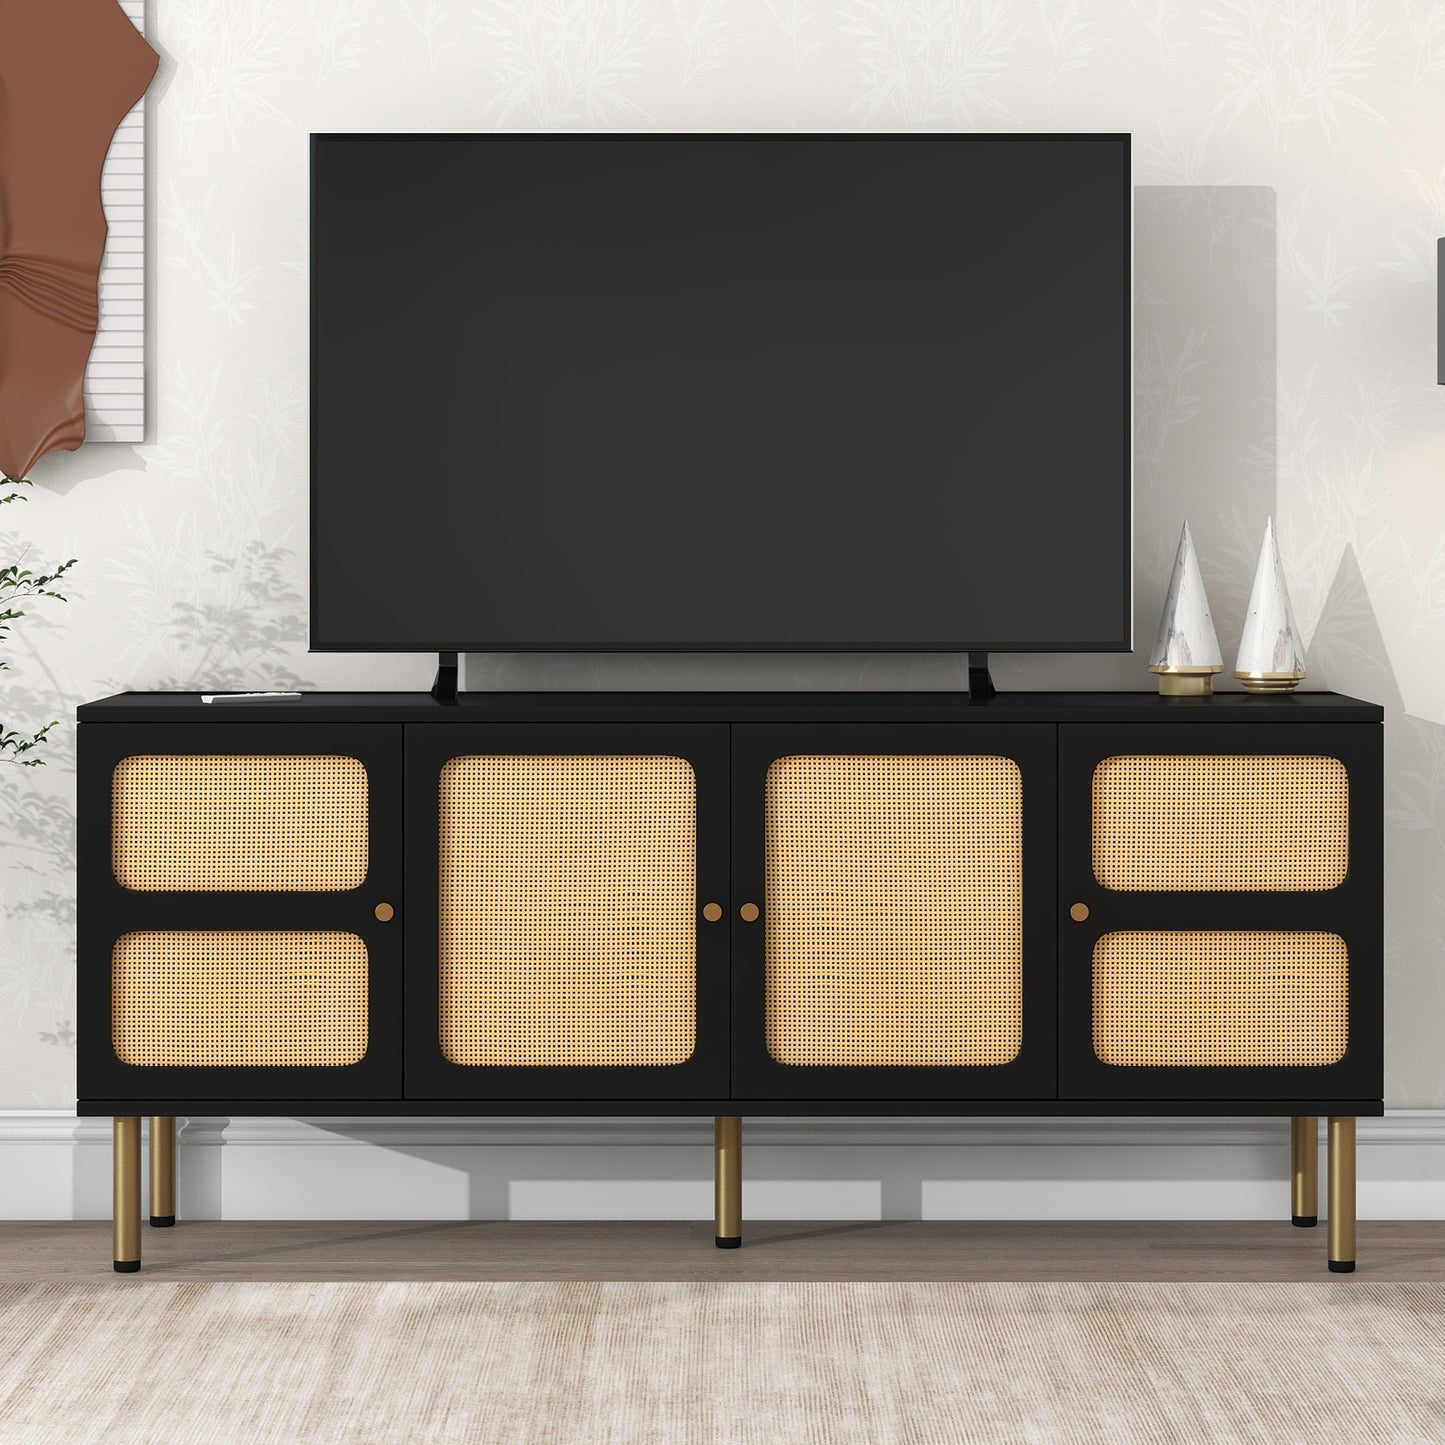 ON-TREND Boho style TV Stand with Rattan Door, Woven Media Console Table for TVs Up to 70'', Country Style Design Side Board with Gold Metal Base for Living Room, Black.